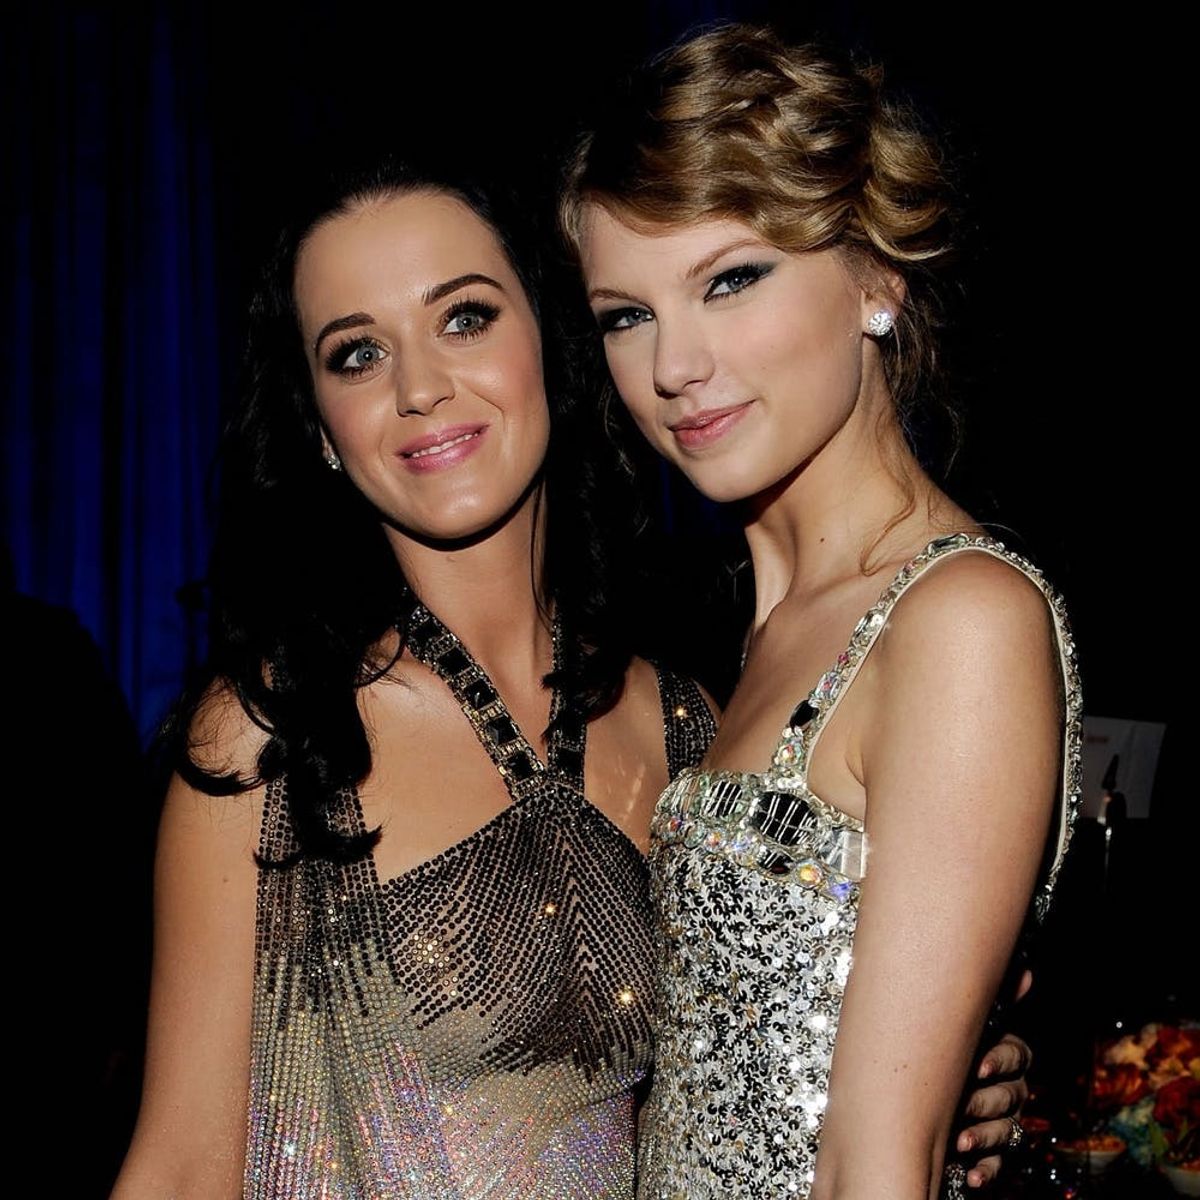 Is Katy Perry Making a Cameo in Taylor Swift’s Next Music Video?